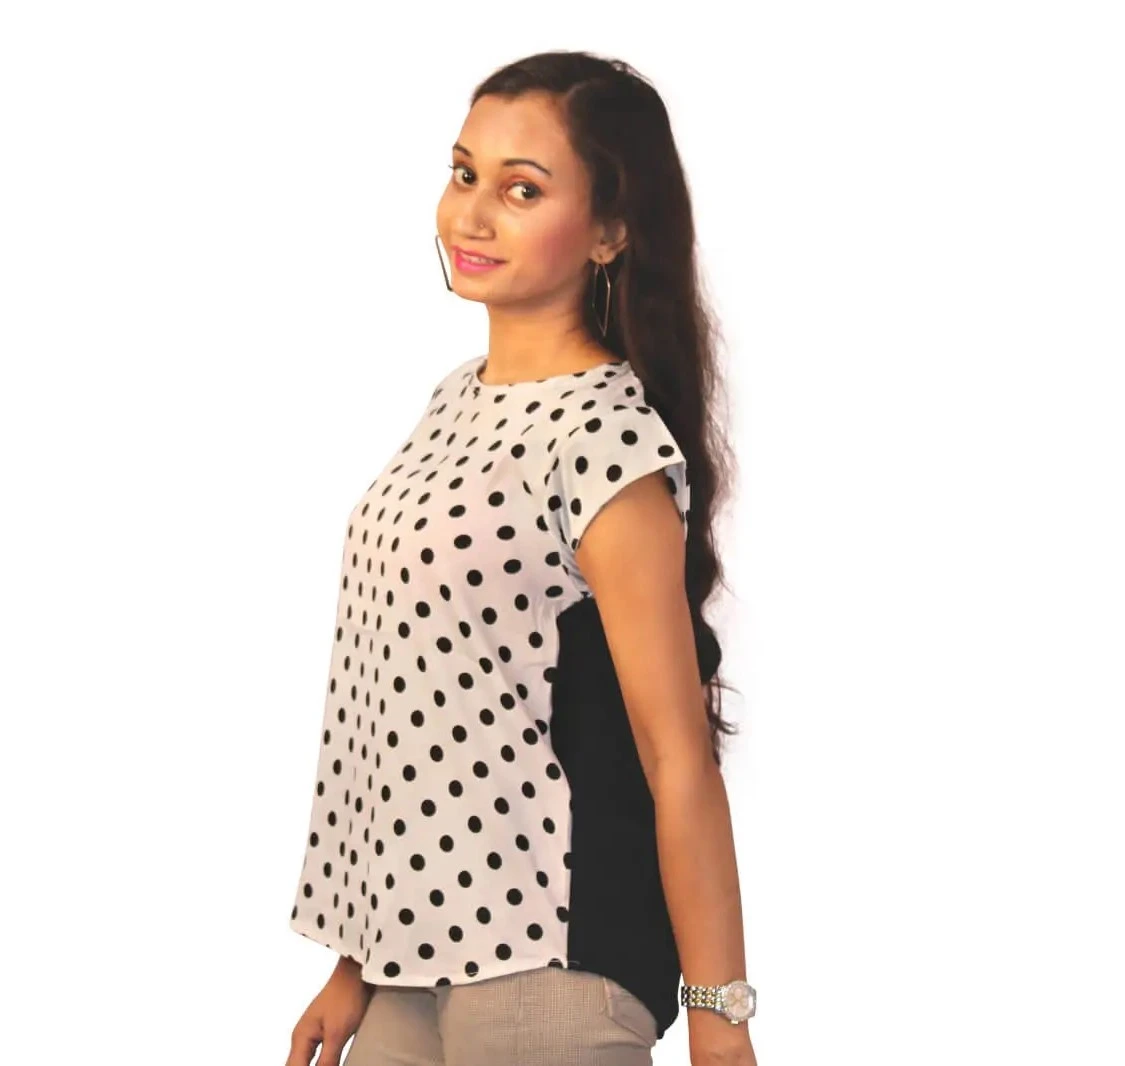 Comfort Meets Style: Sleeveless Tops for Women